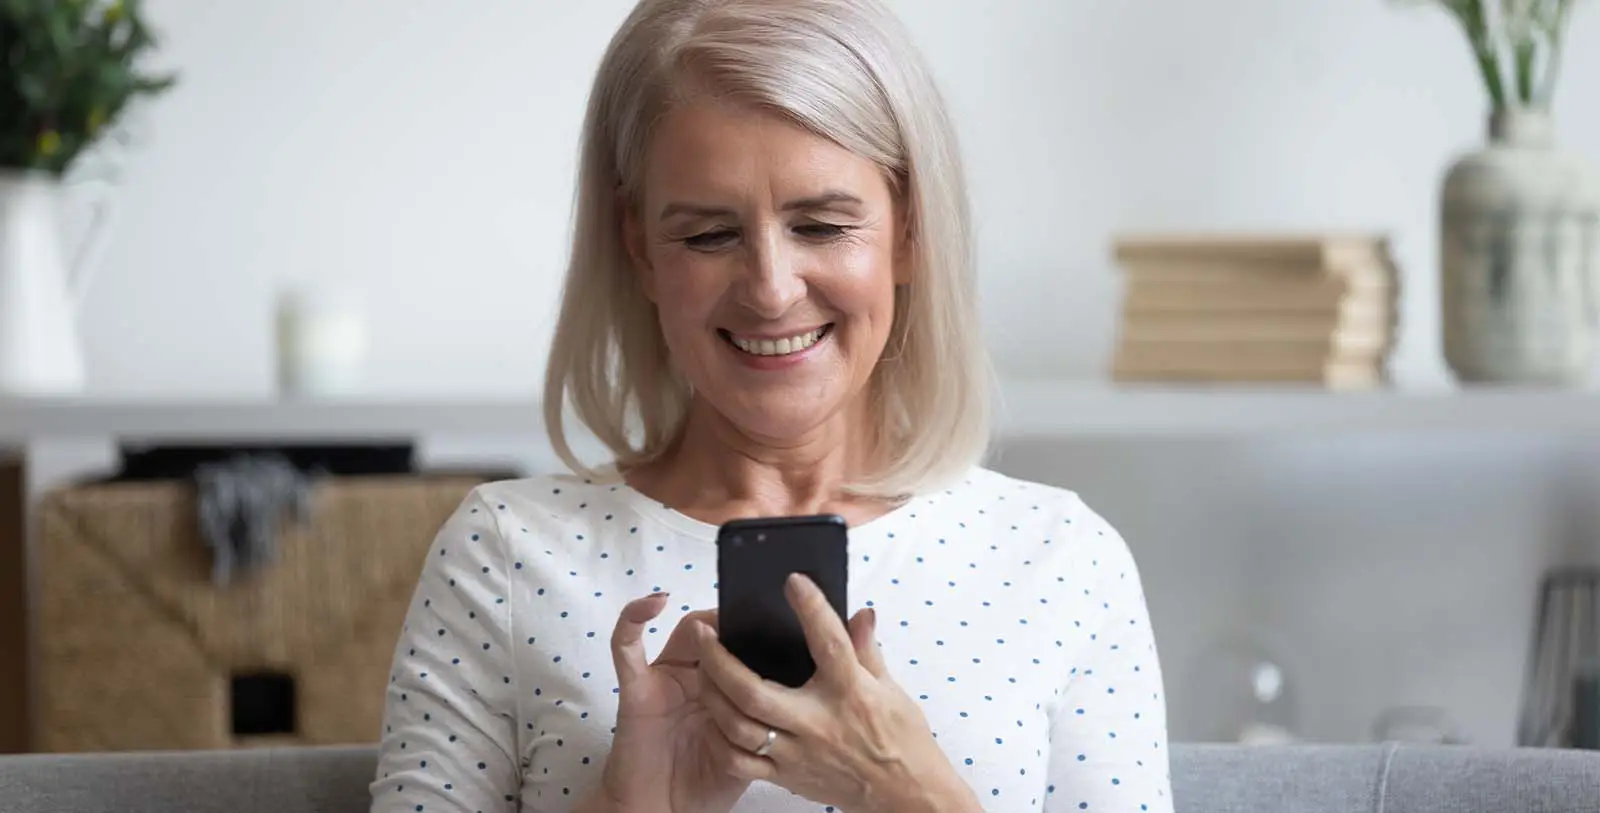 a happy middle-aged woman using Propline property management app in her smartphone and happy with her easy investment